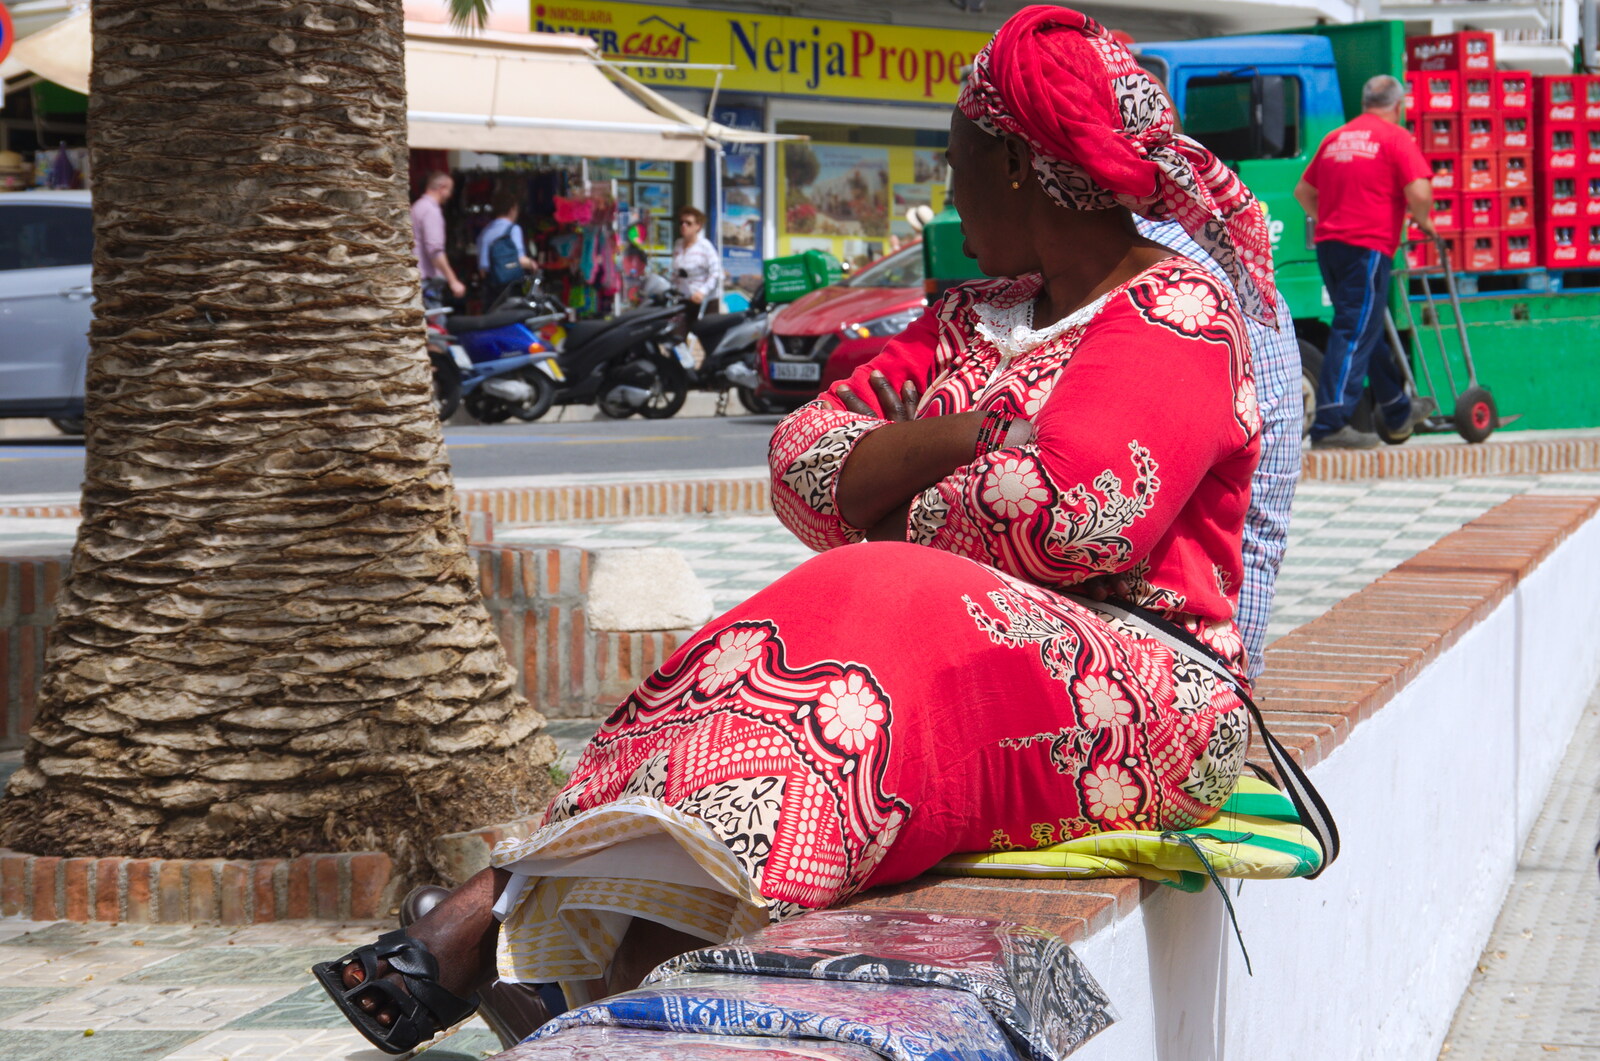 An African woman waits to sell blankets from Torrecilla Beach and the Nerja Museum, Andalusia, Spain - 17th April 2019